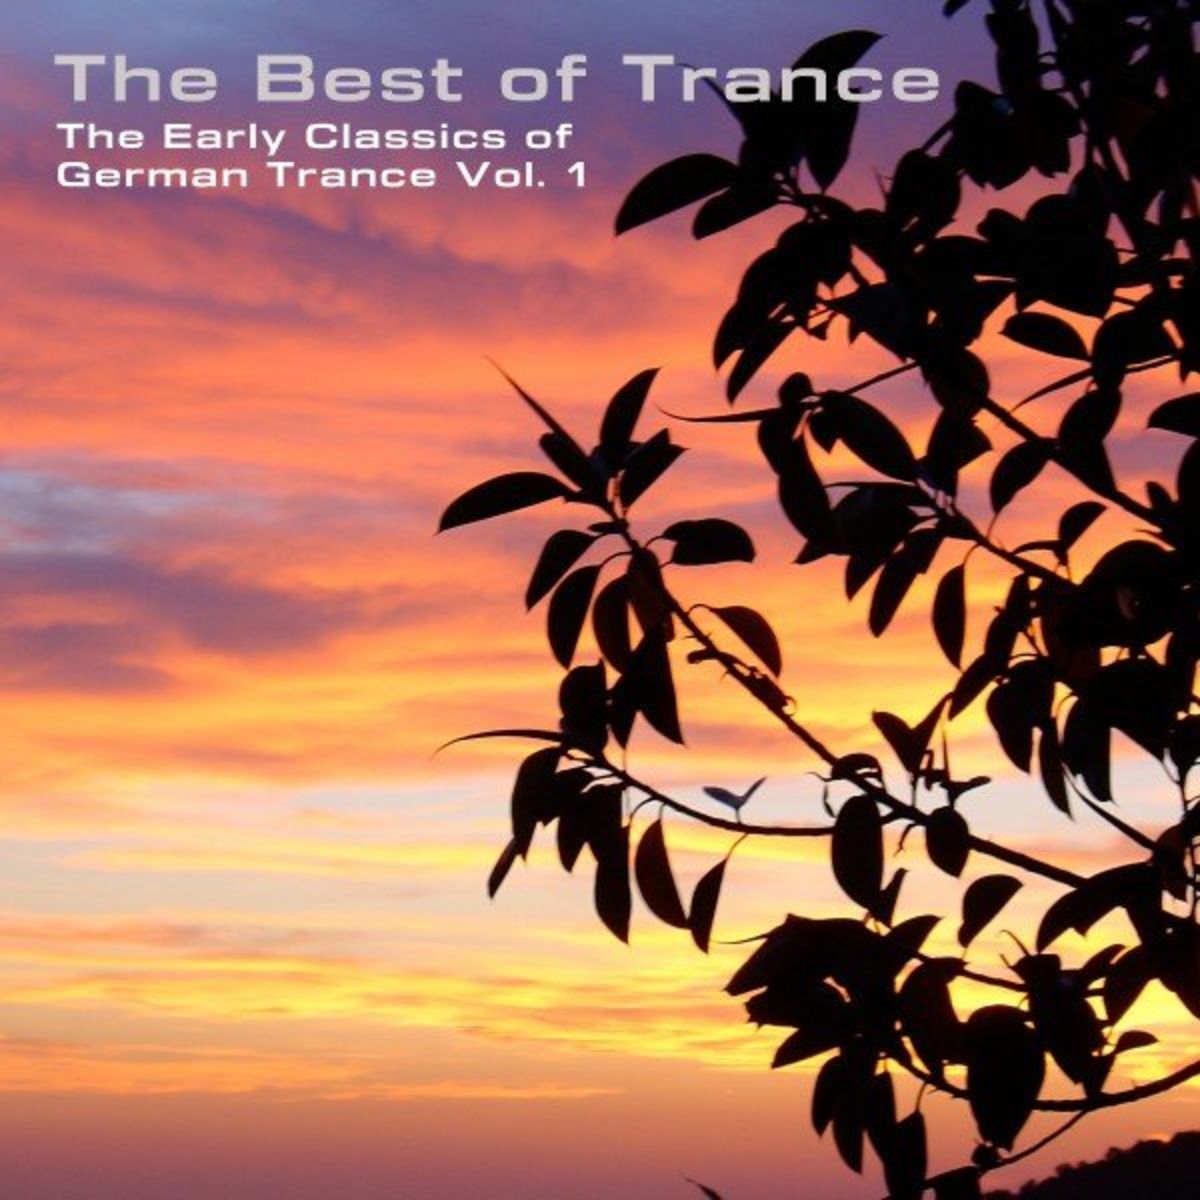 The best of Trance (the early classics of German Trance vol. 1 & 2